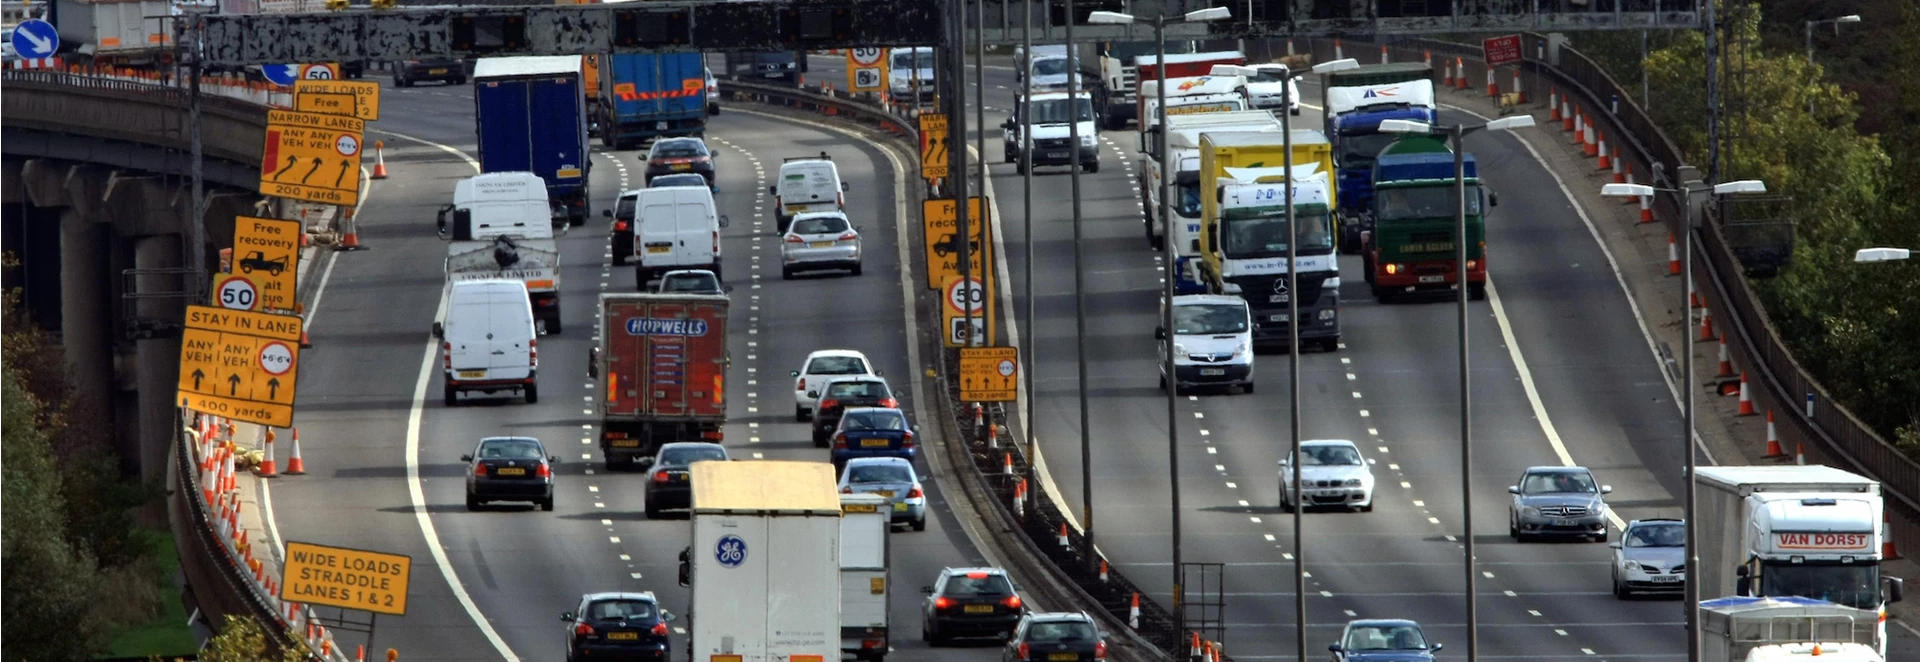 Roadworks will be banned on major routes over Christmas